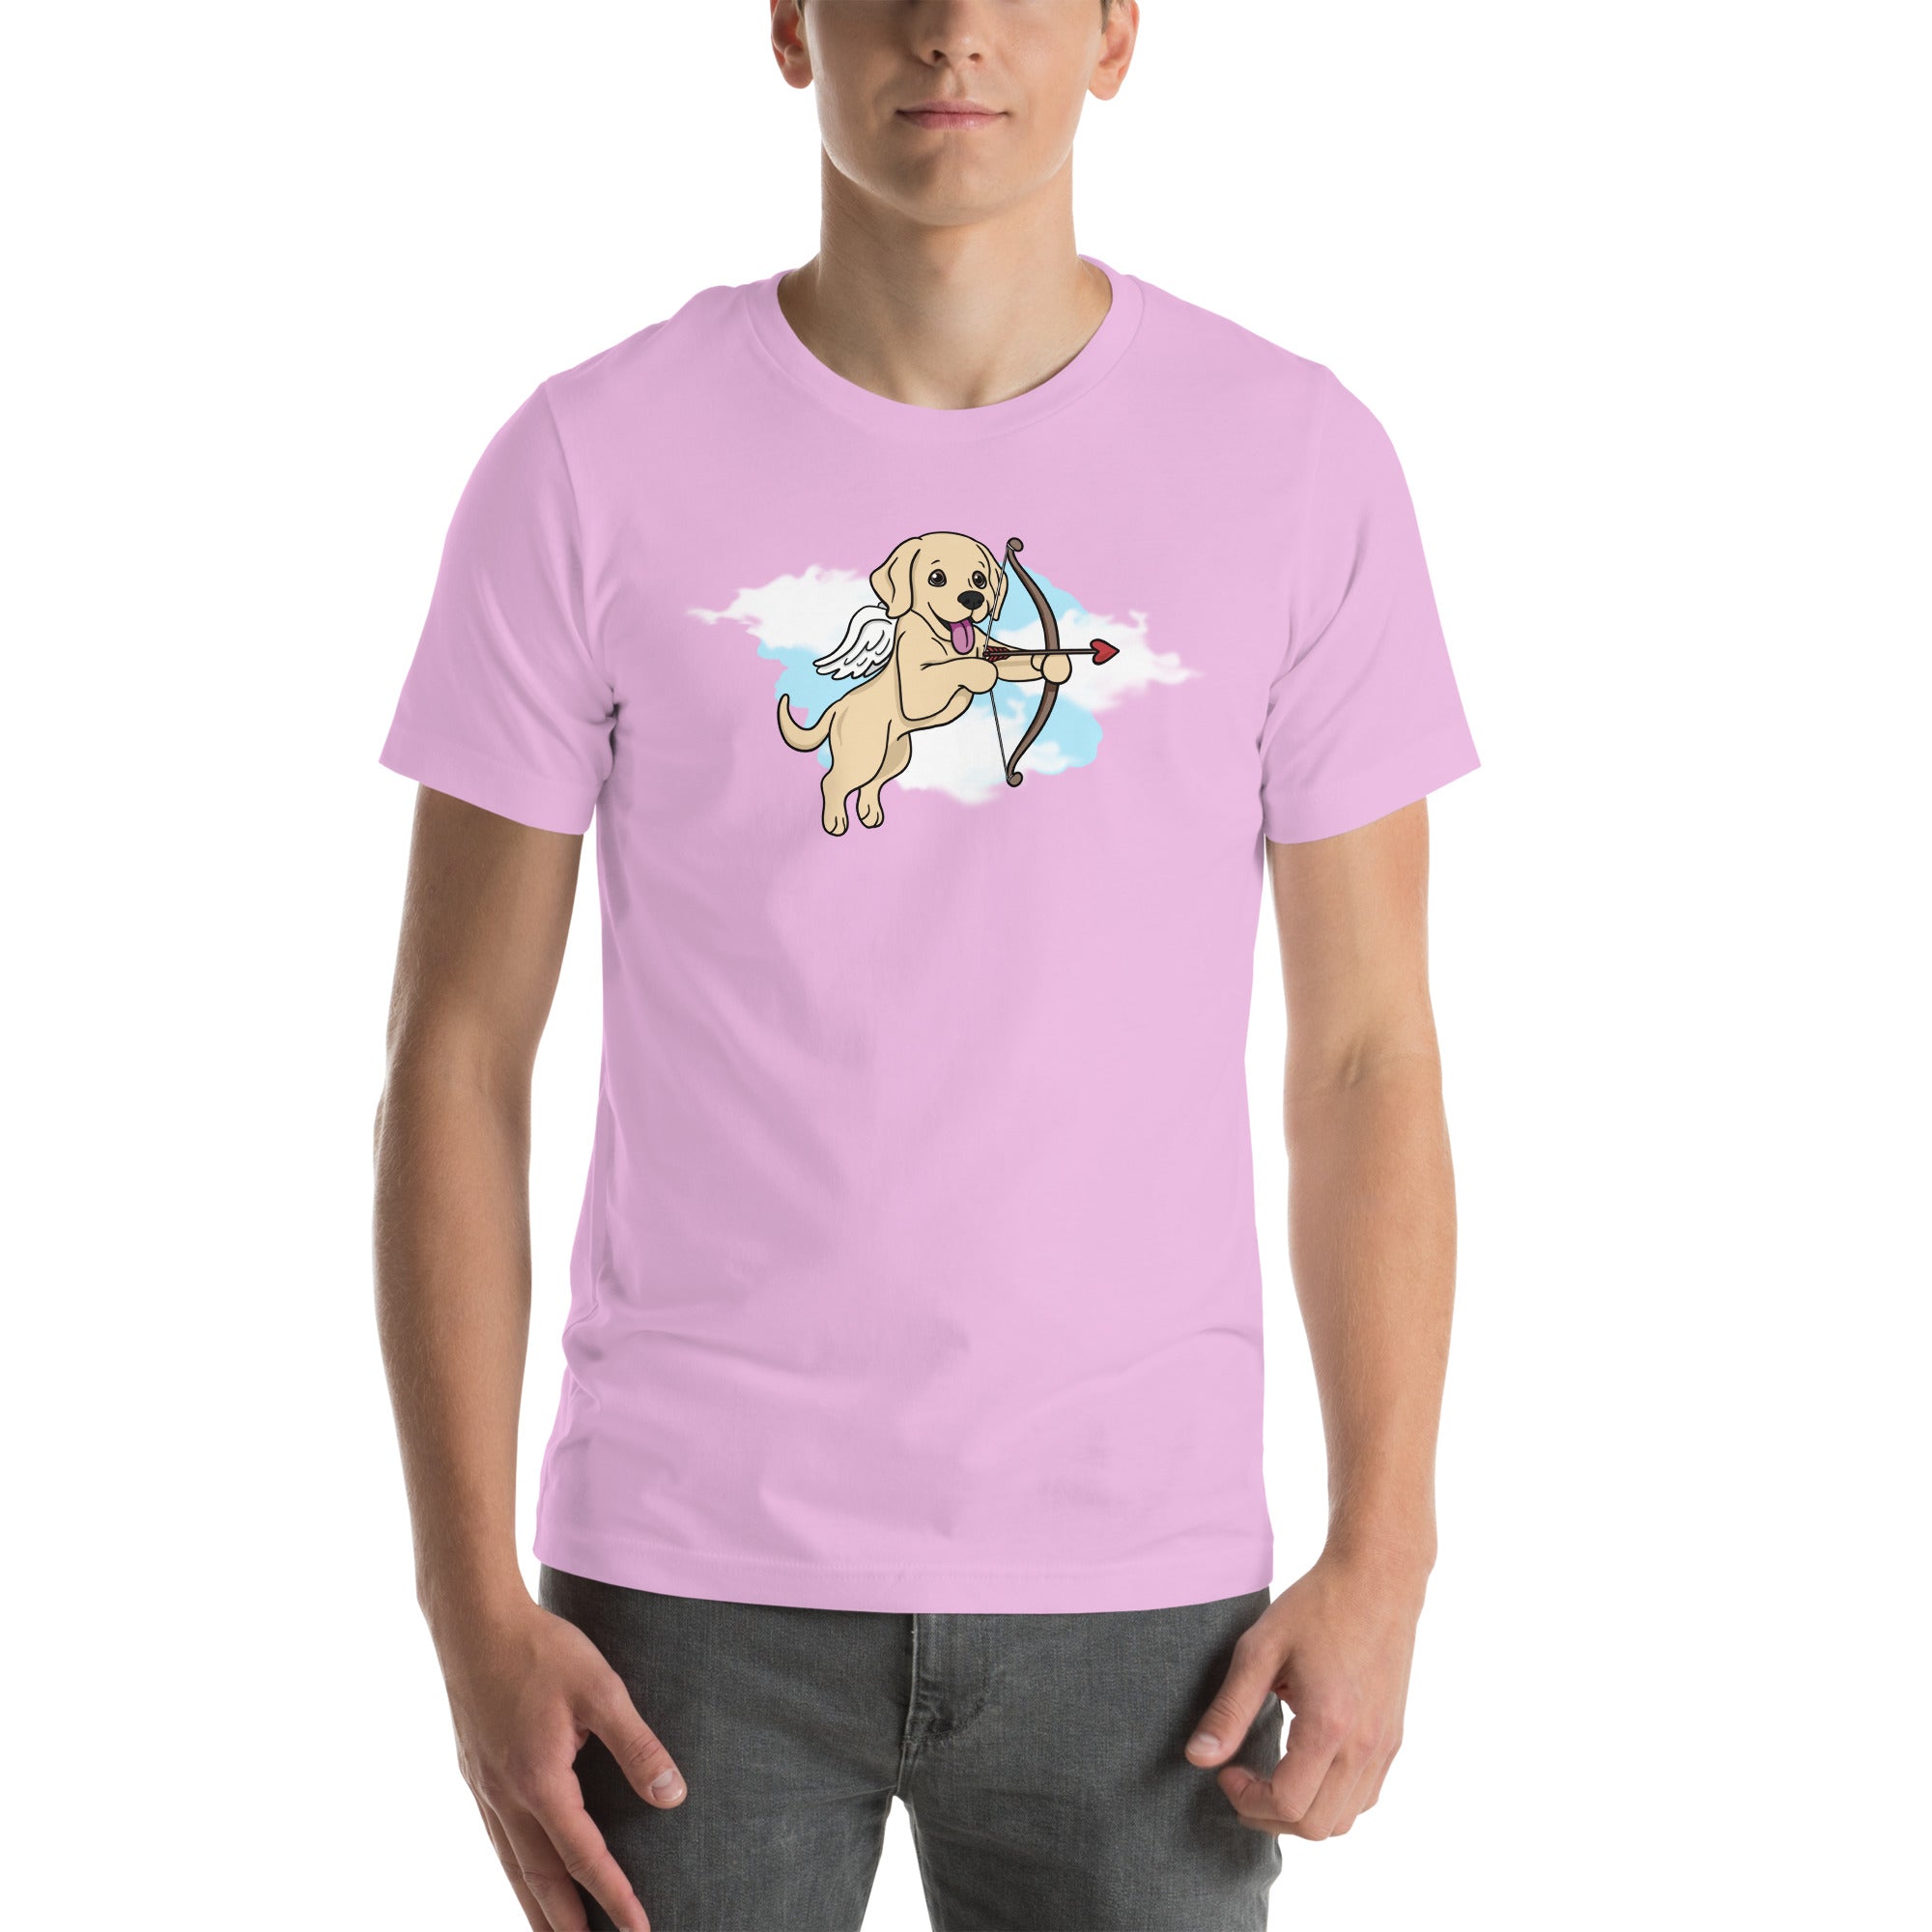 Cupup T-Shirt - TAILWAGS UNLIMITED